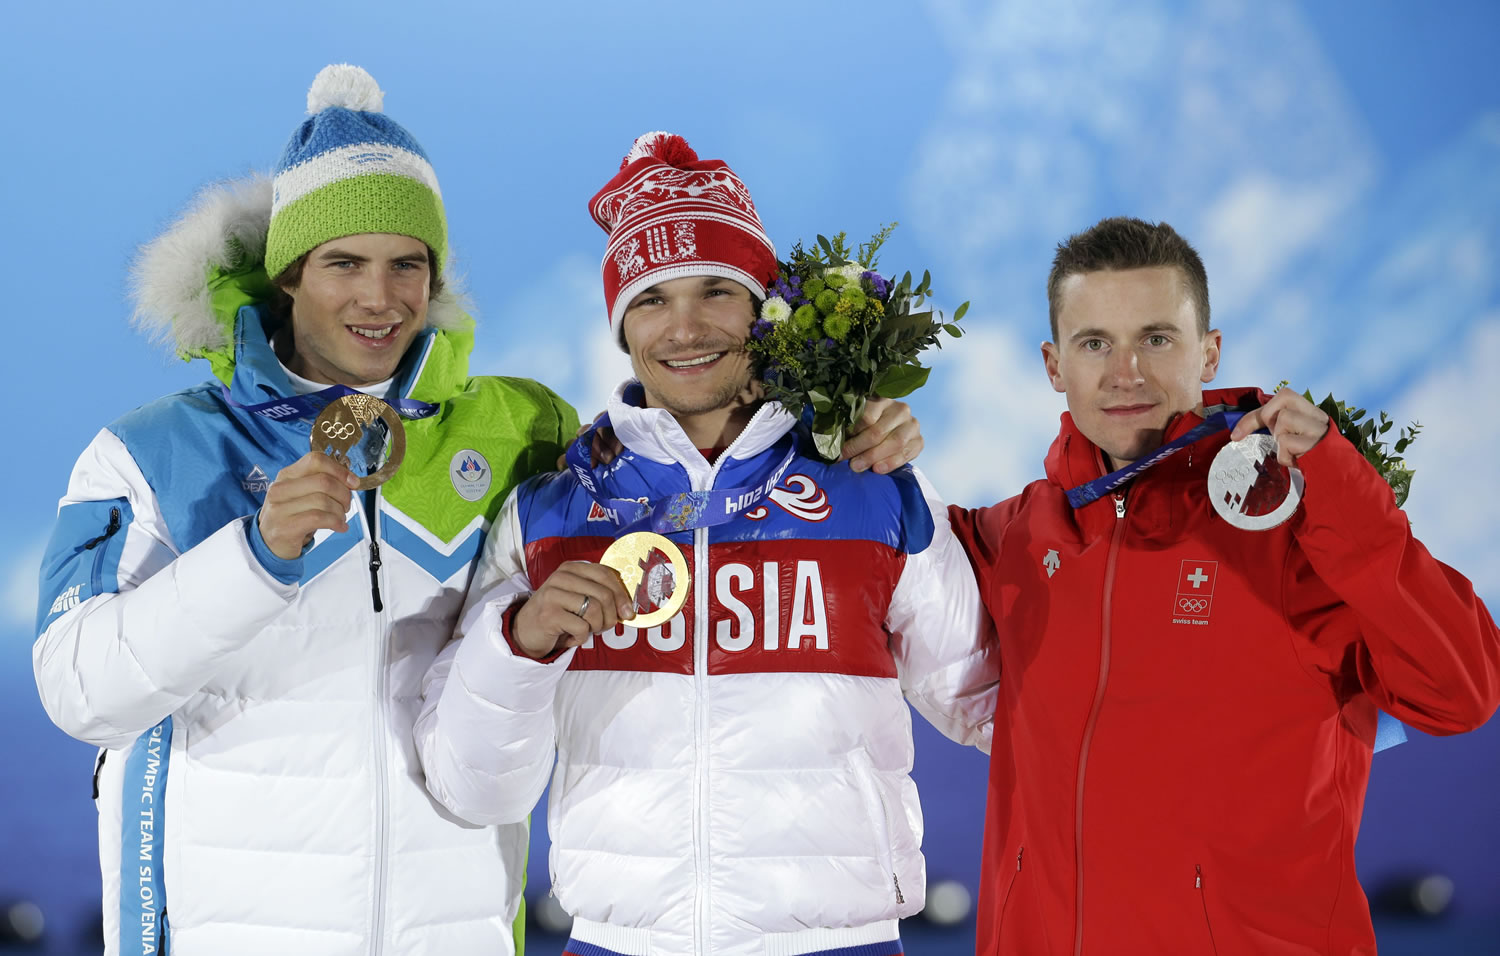 Men's snowboard parallel giant slalom medalists, from left, Slovenia's Zan Kosir, bronze, Russia's Vic Wild, gold, and Switzerland's Nevin Galmarini, silver, pose with their medals at the 2014 Winter Olympics in Sochi, Russia, Wednesday, Feb. 19, 2014.